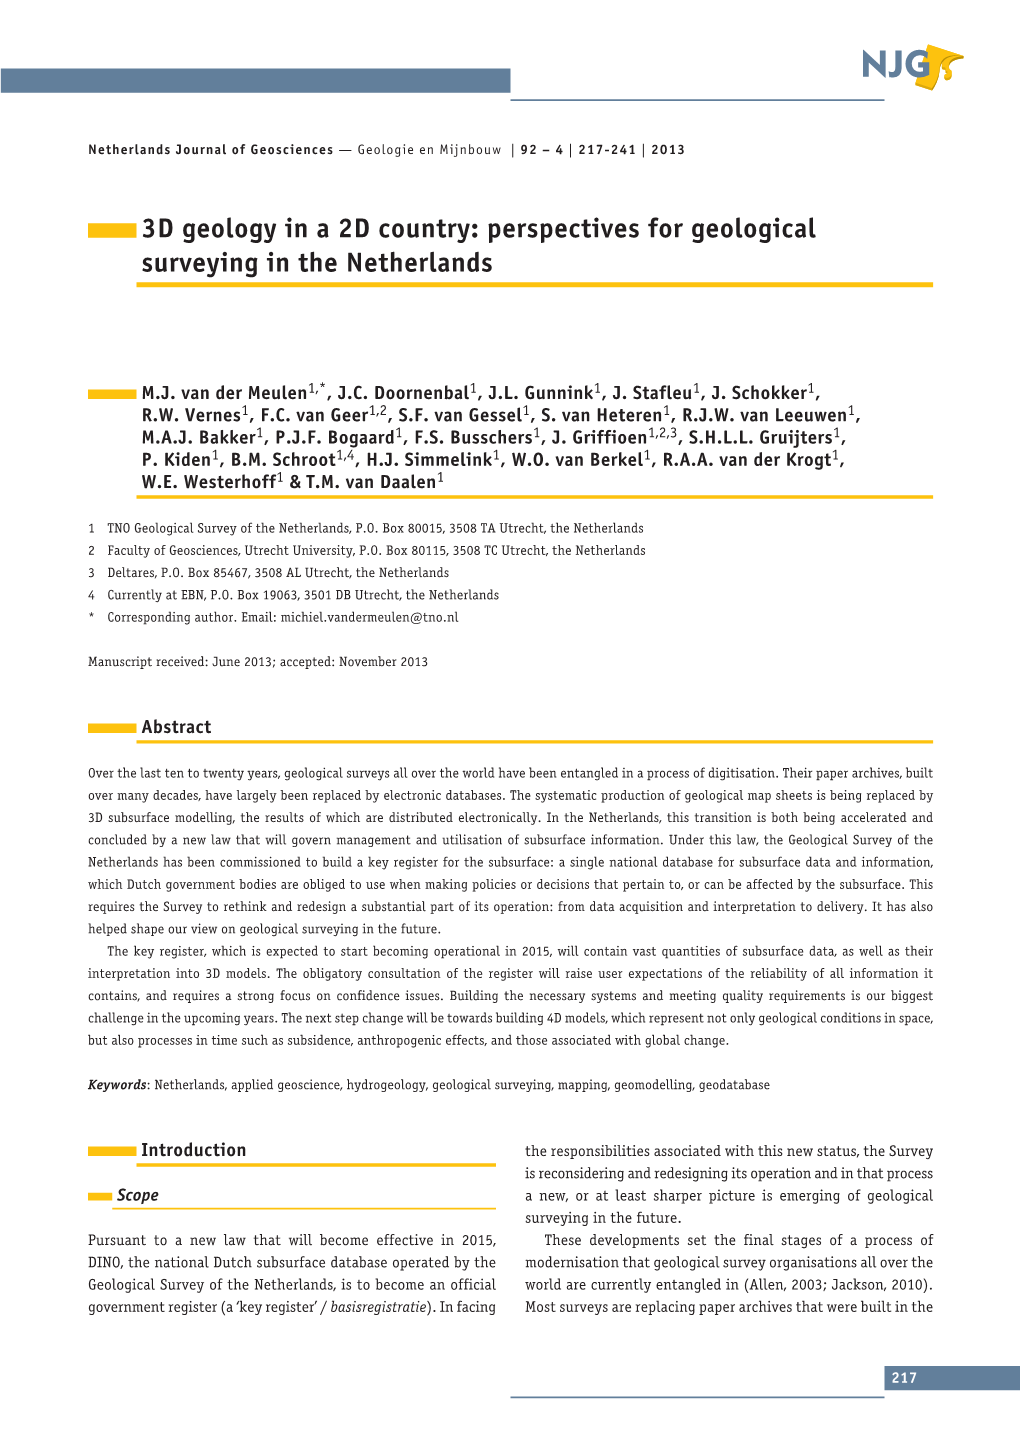 Perspectives for Geological Surveying in the Netherlands